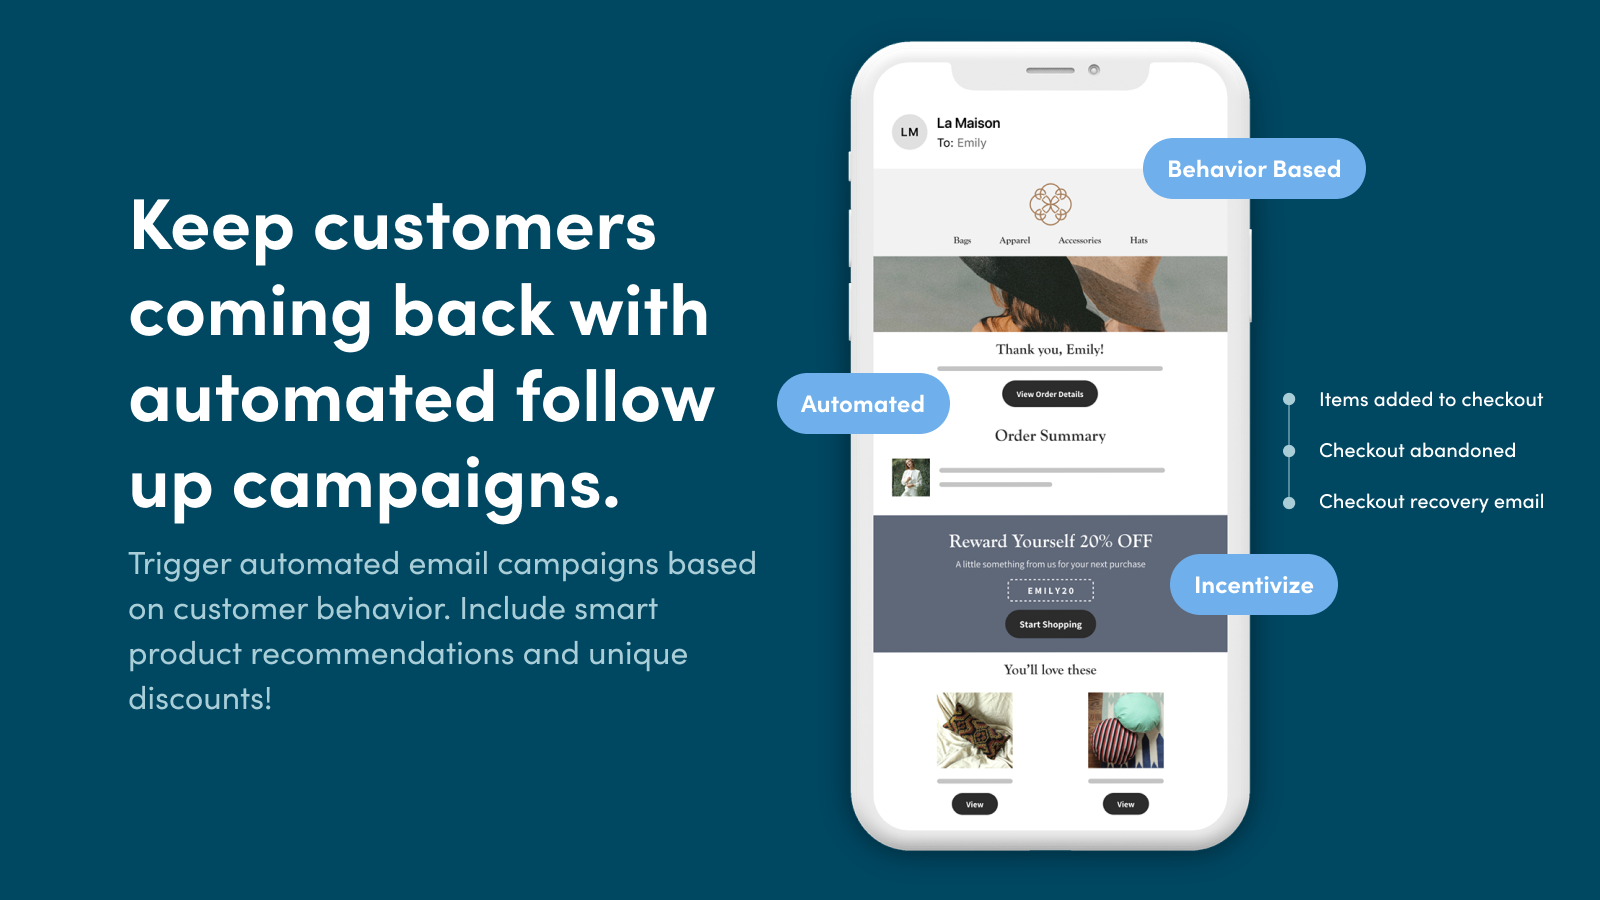 Keep customers coming back with automated follow up campaigns.